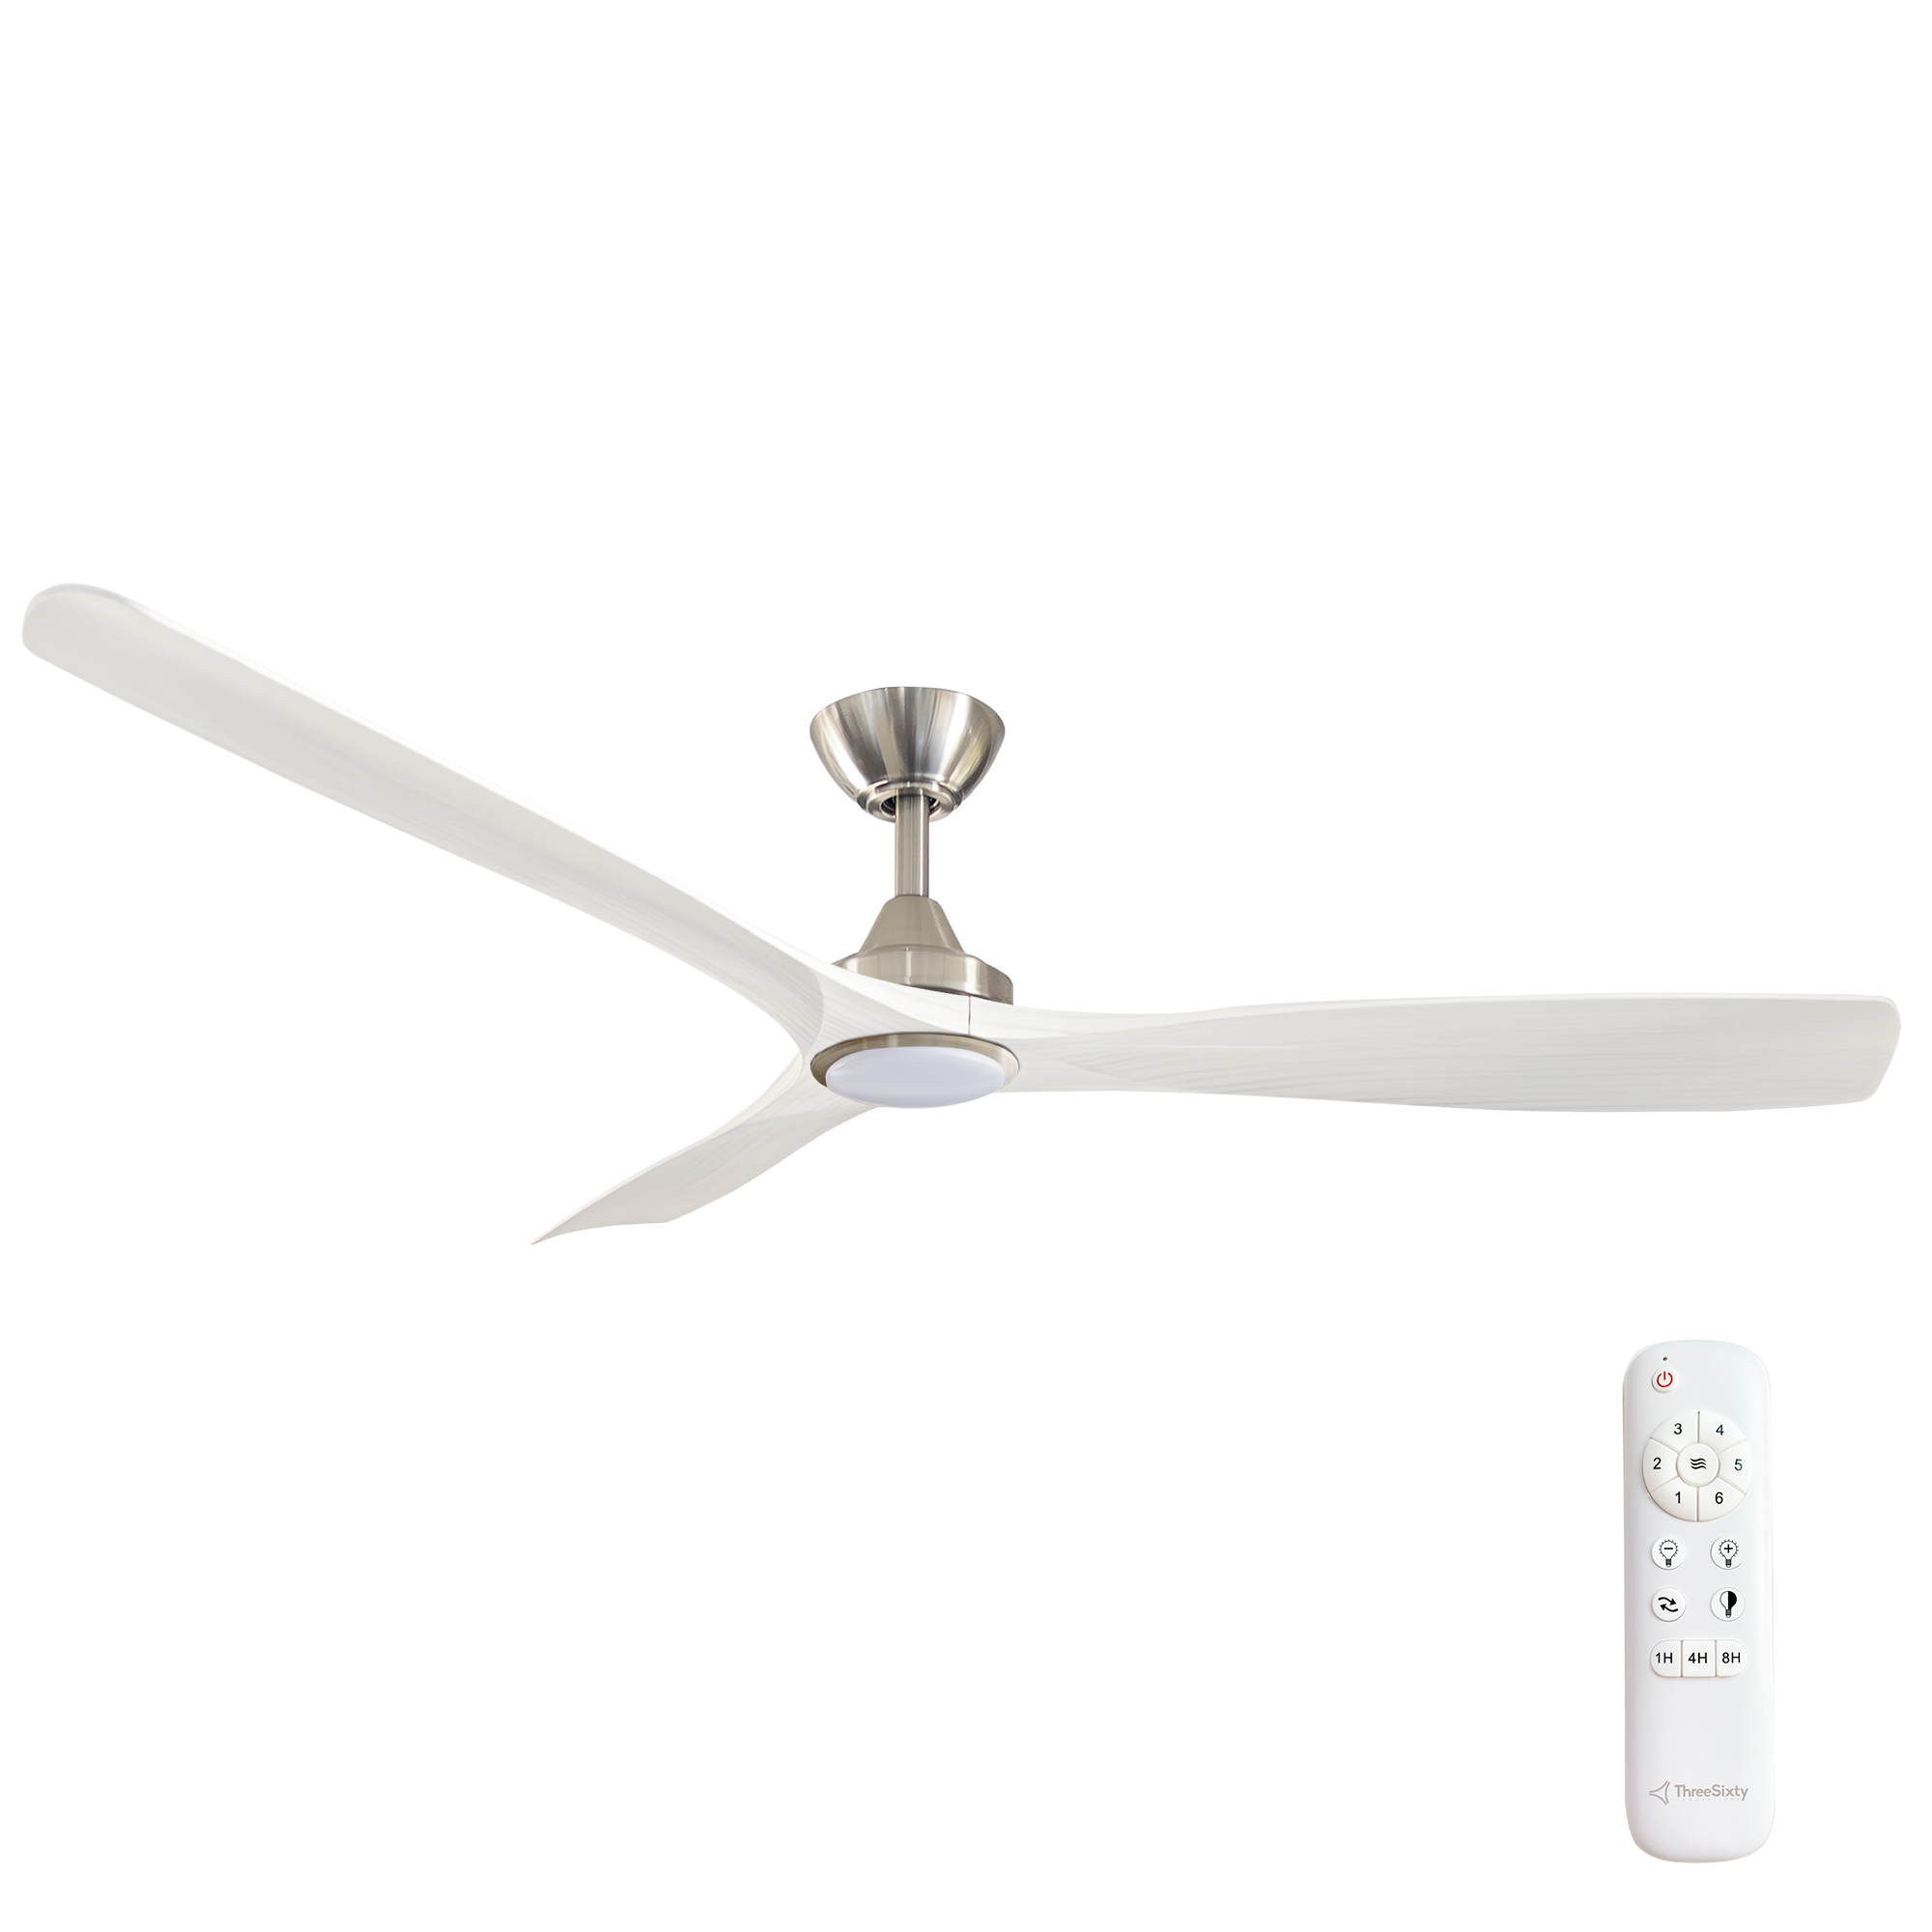 60" Spitfire DC Ceiling Fan in Brushed Nickel with White Wash blades and 18W CCT LED Light